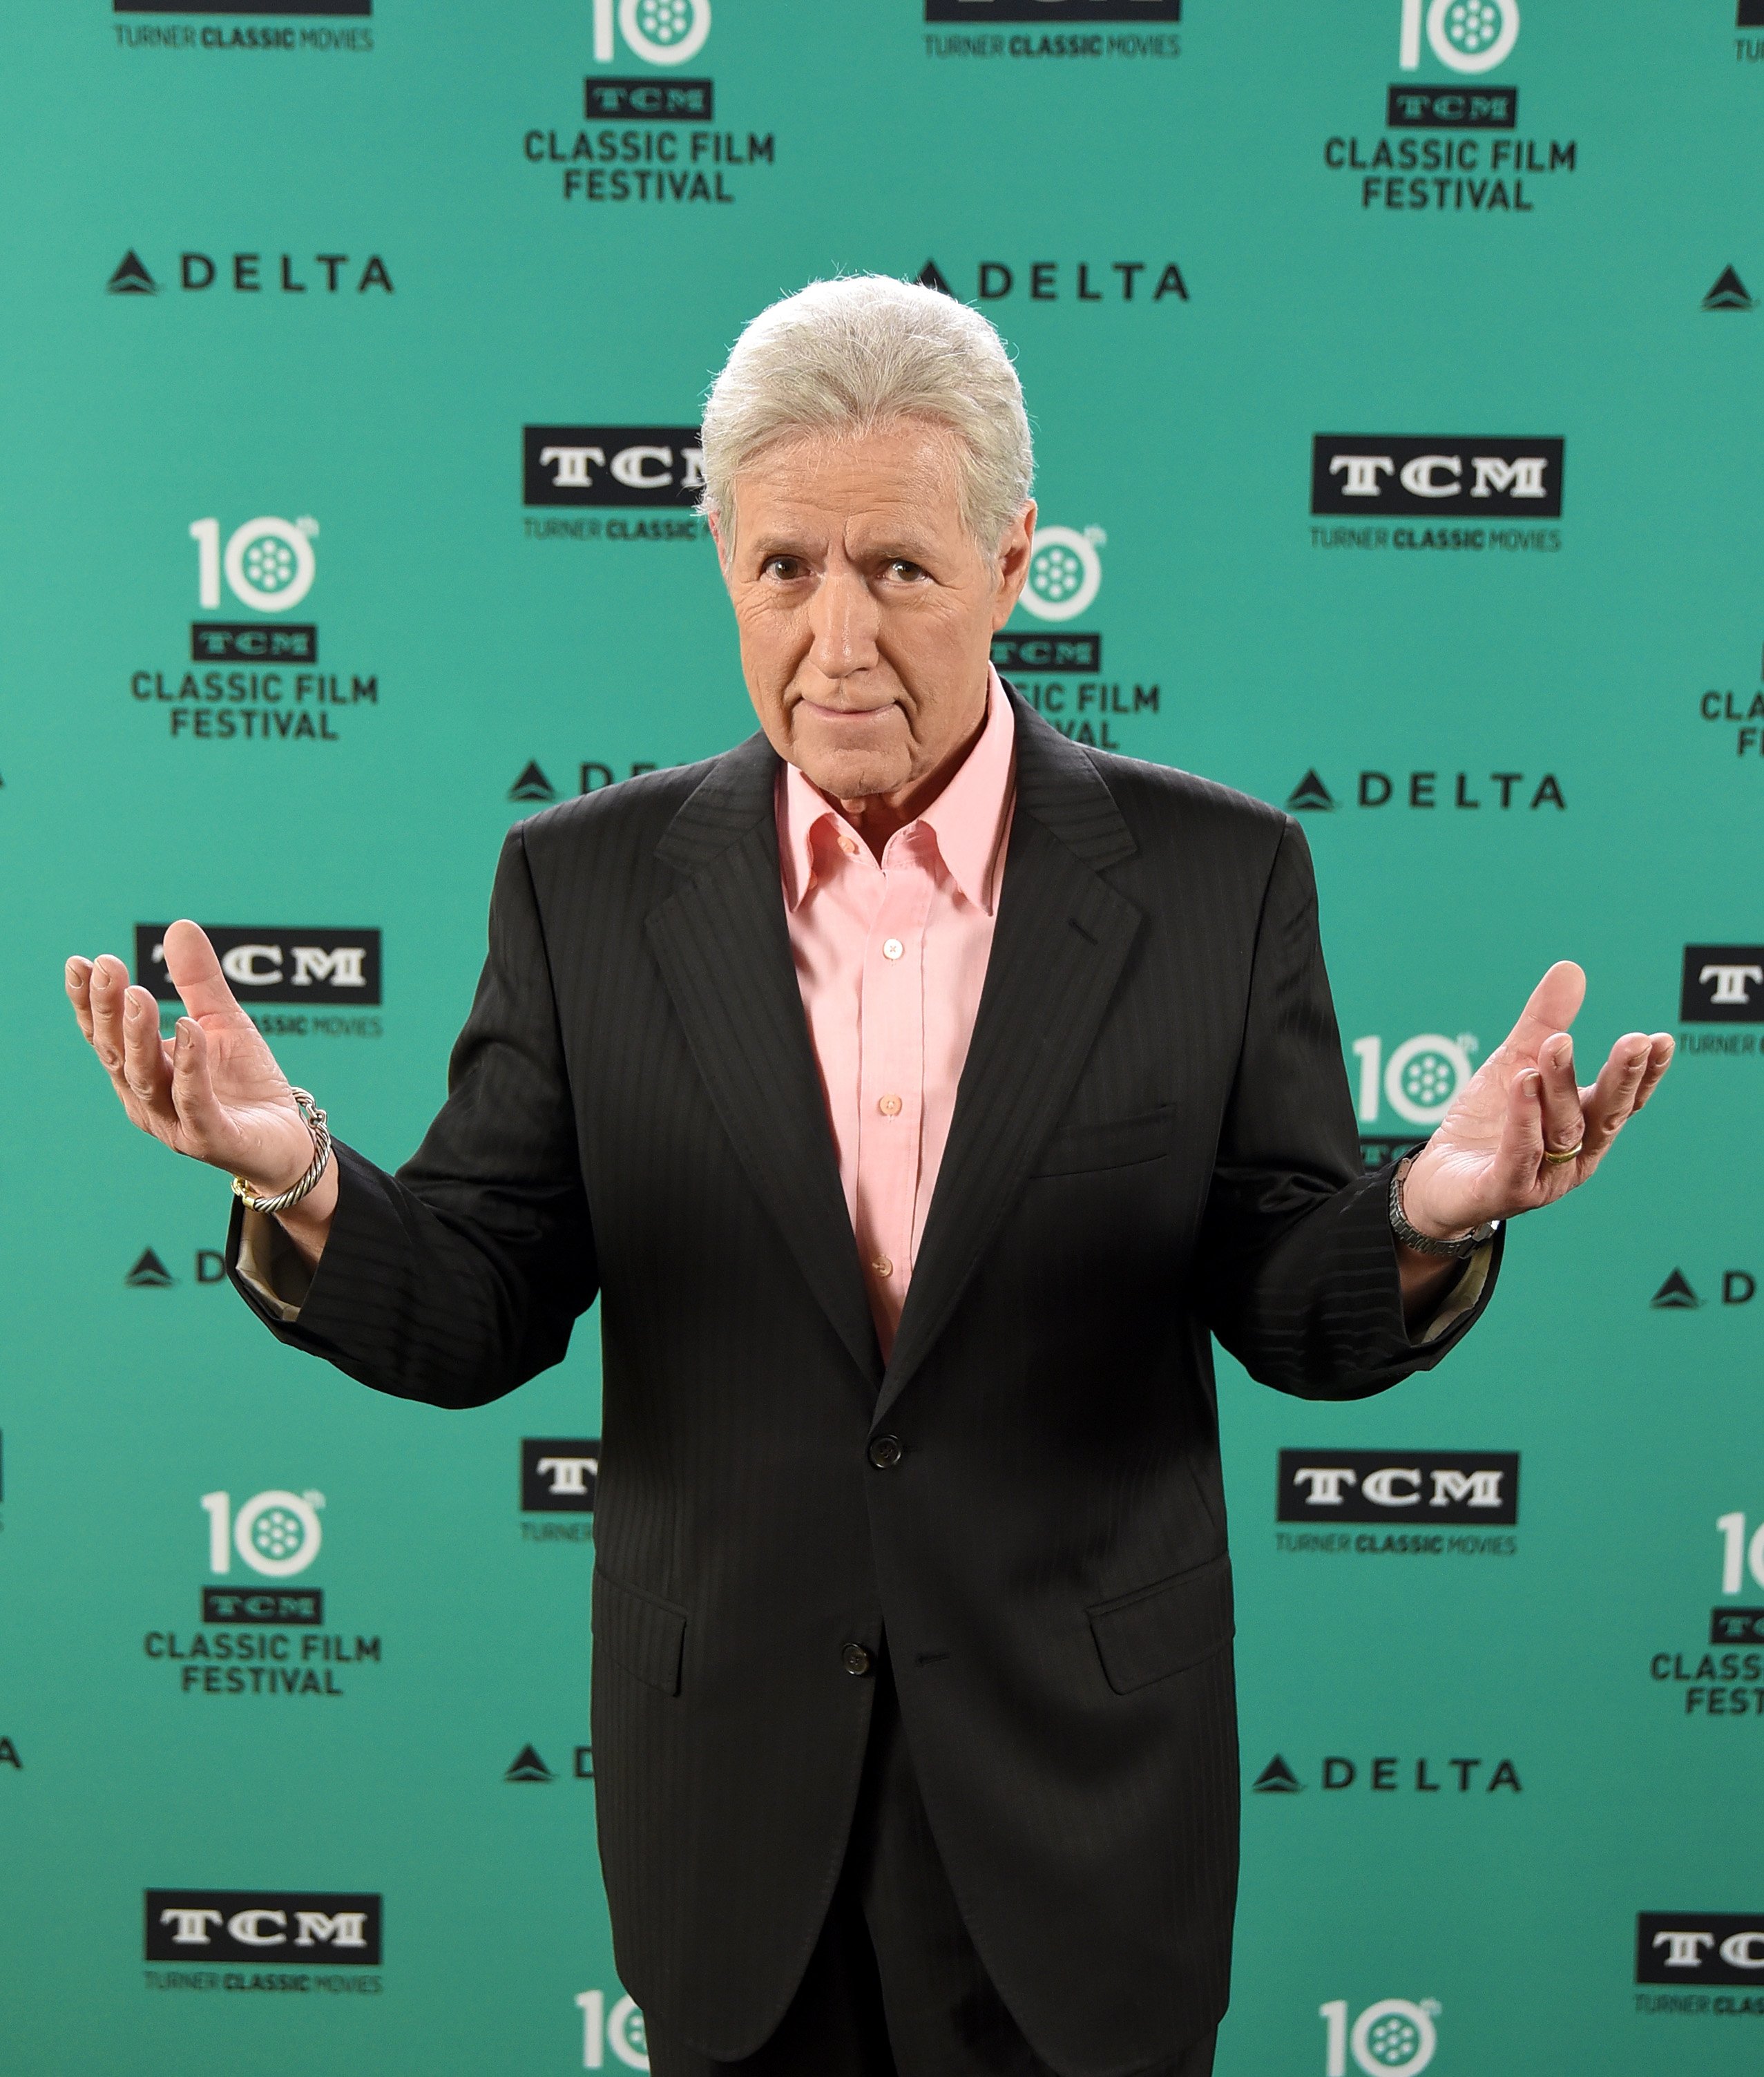 Alex Trebek attends the screening of "Wuthering Heights" on April 13, 2019. | Photo: Getty Images